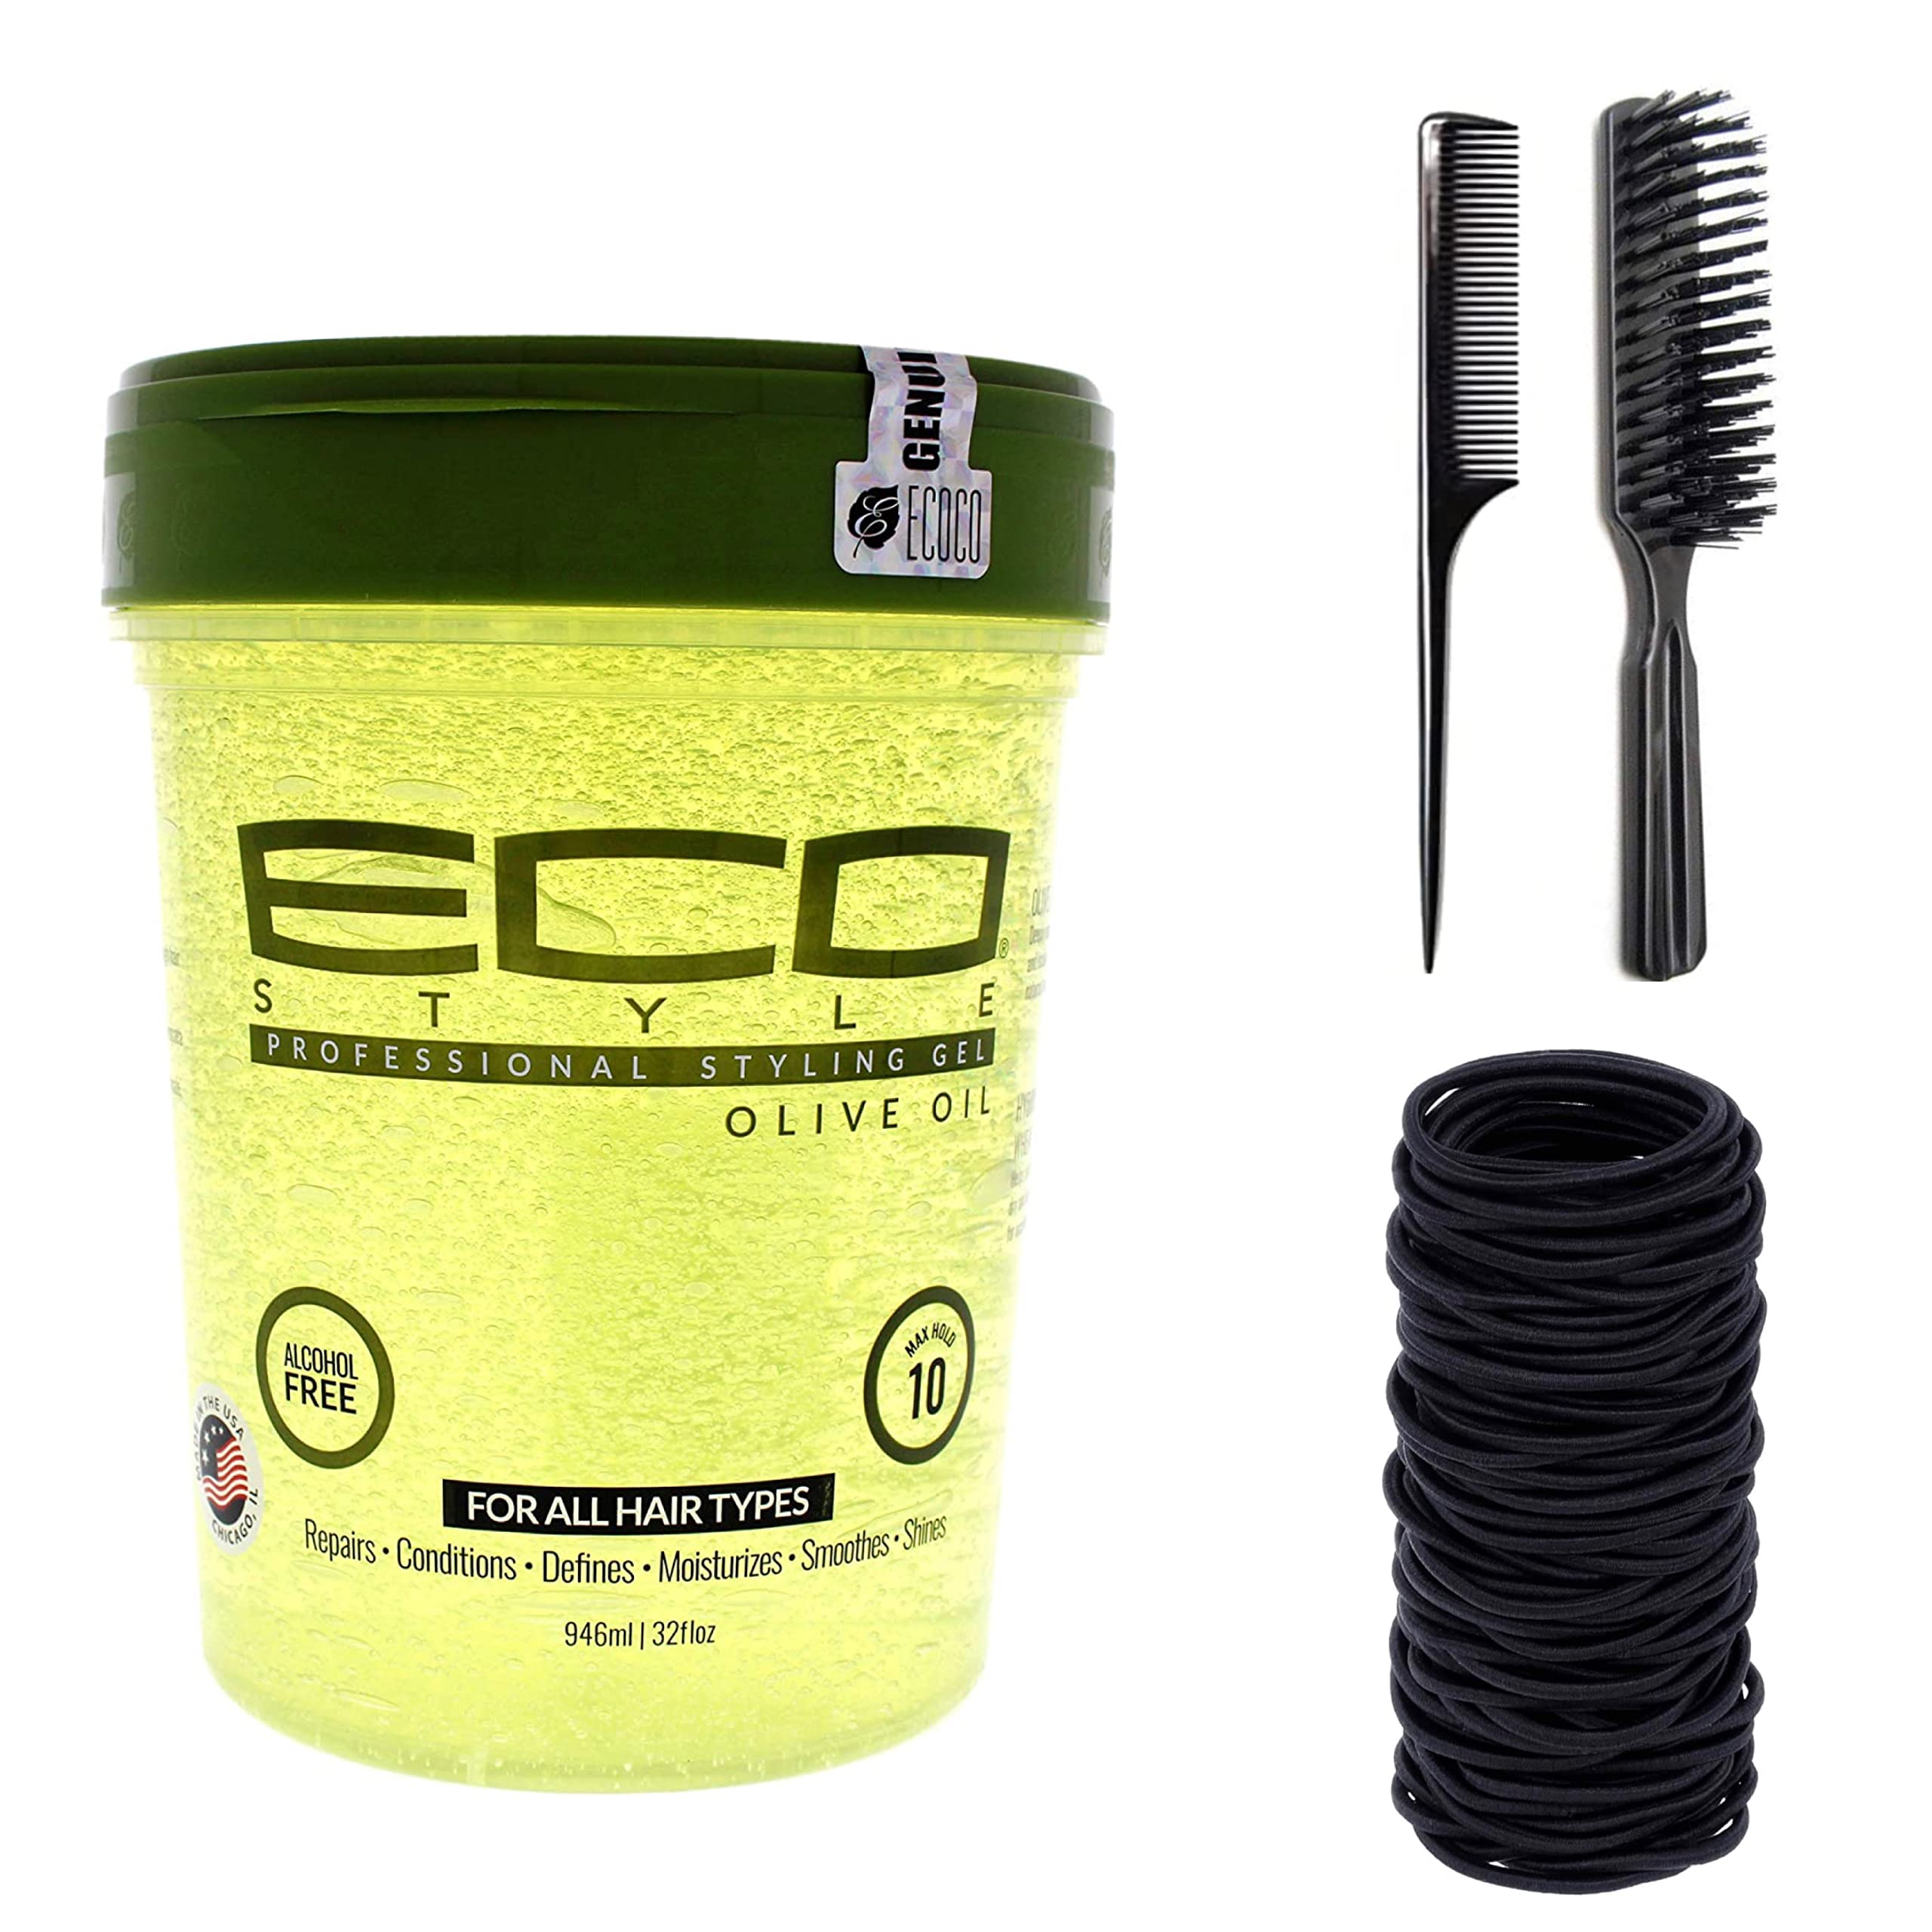 Eco styler gel with olive oil 32